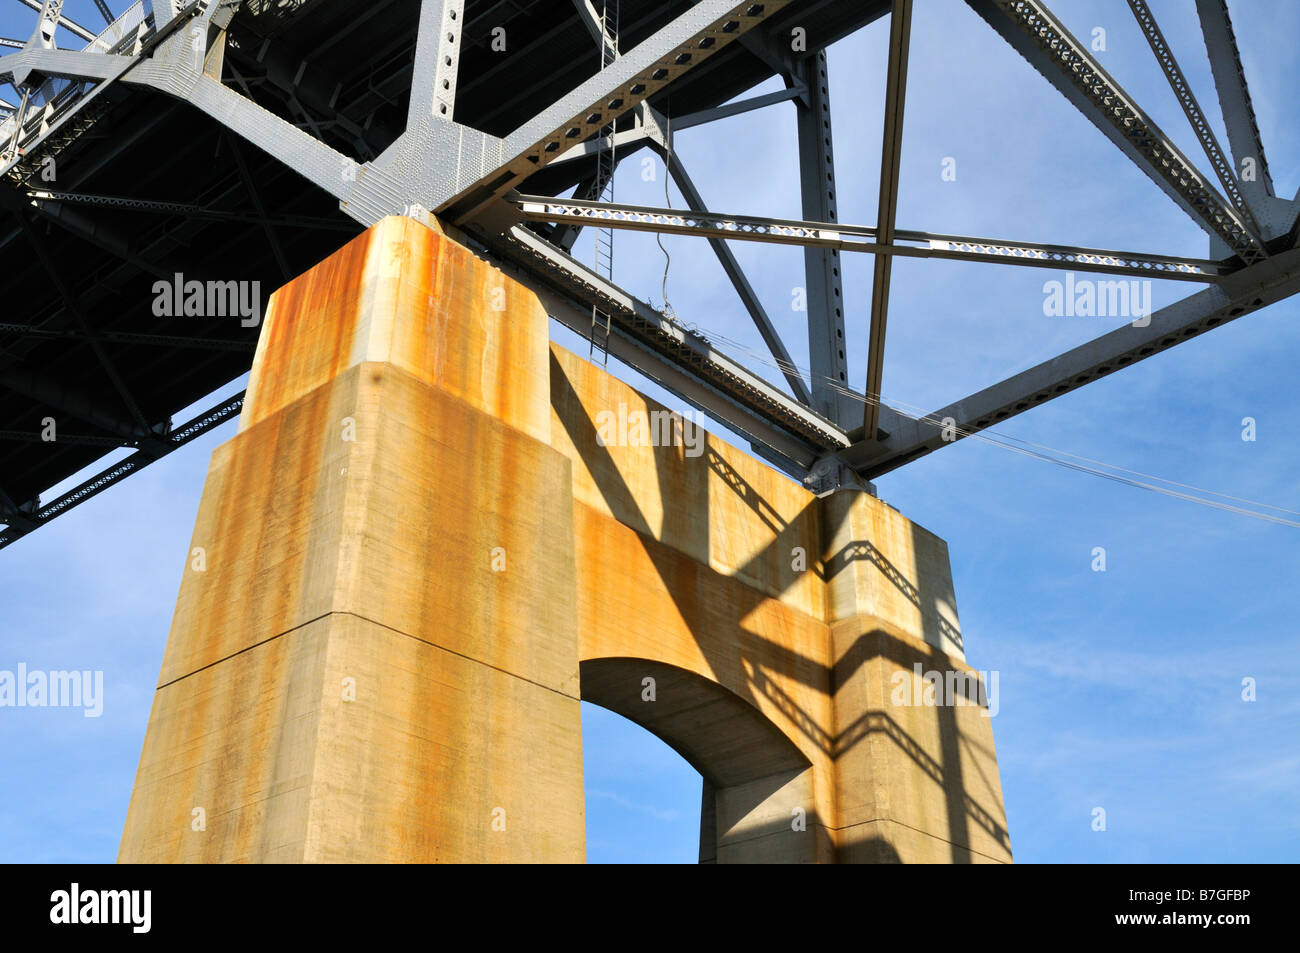 Looking up from under a bridge showing the concrete support steel girders and blue sky Stock Photo